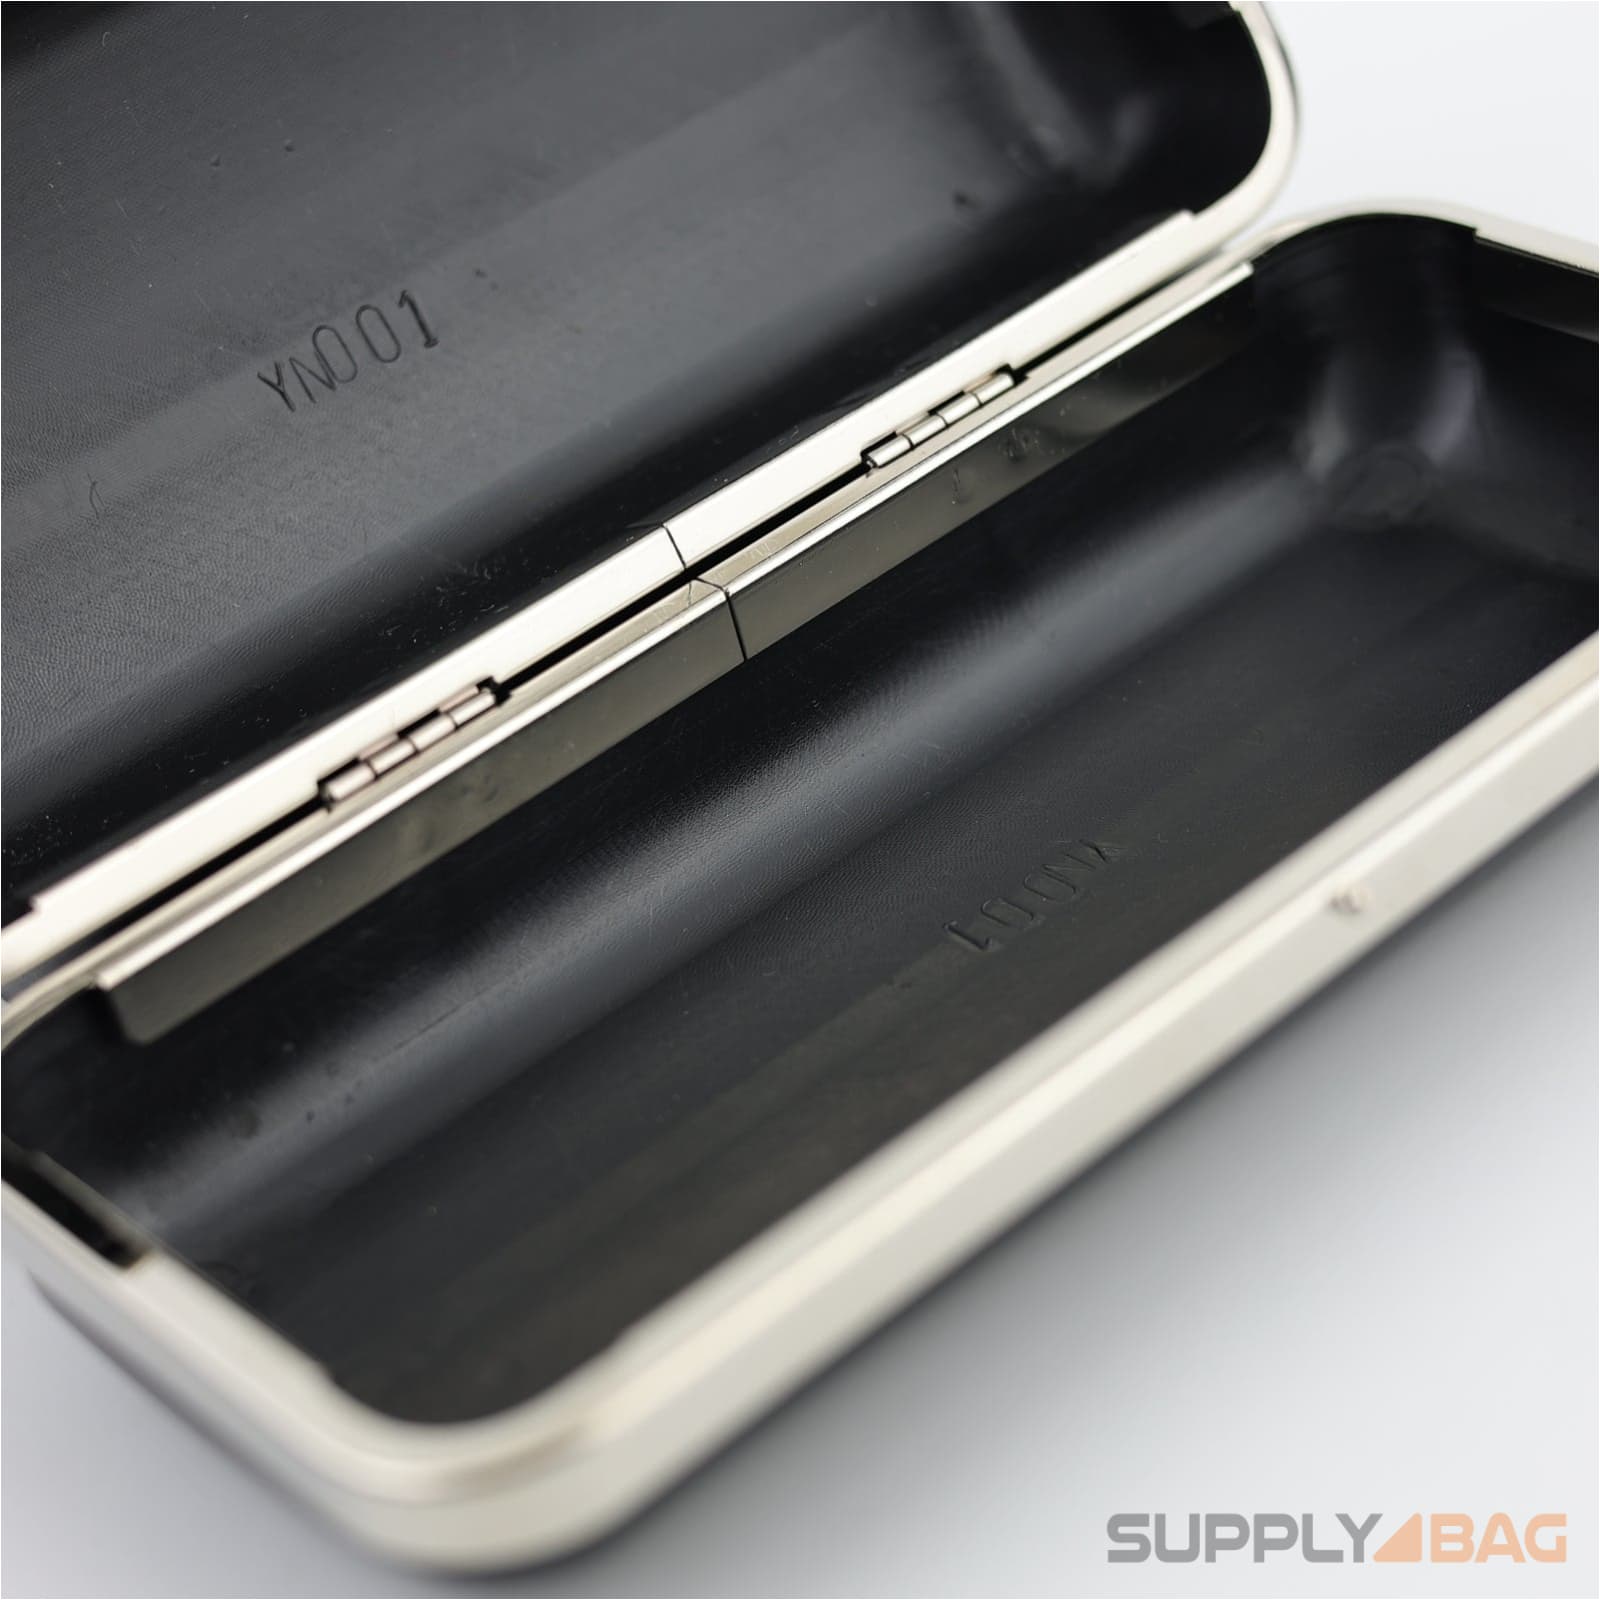 7 x 3 inch - Silver Clamshell Clutch Frame with Covers